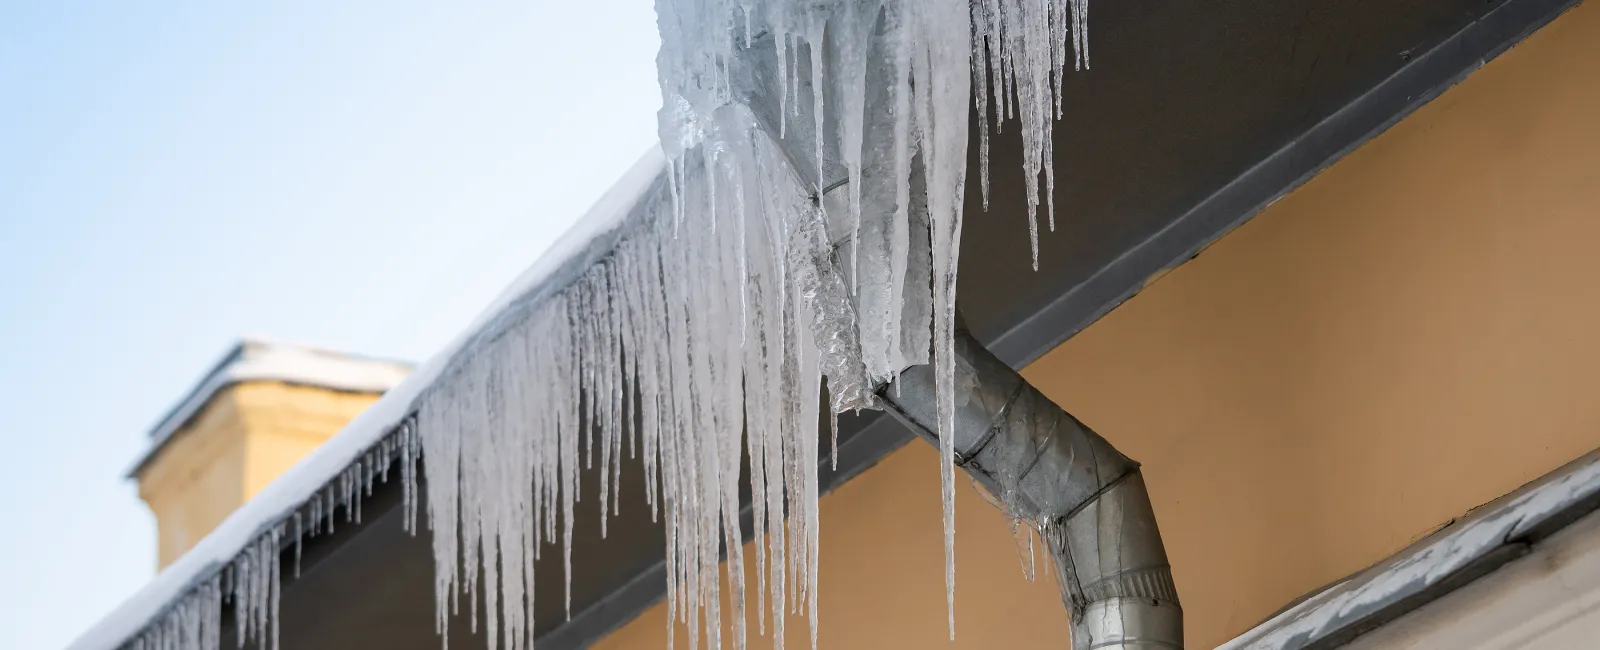 Can Cold Impact Your Roof?